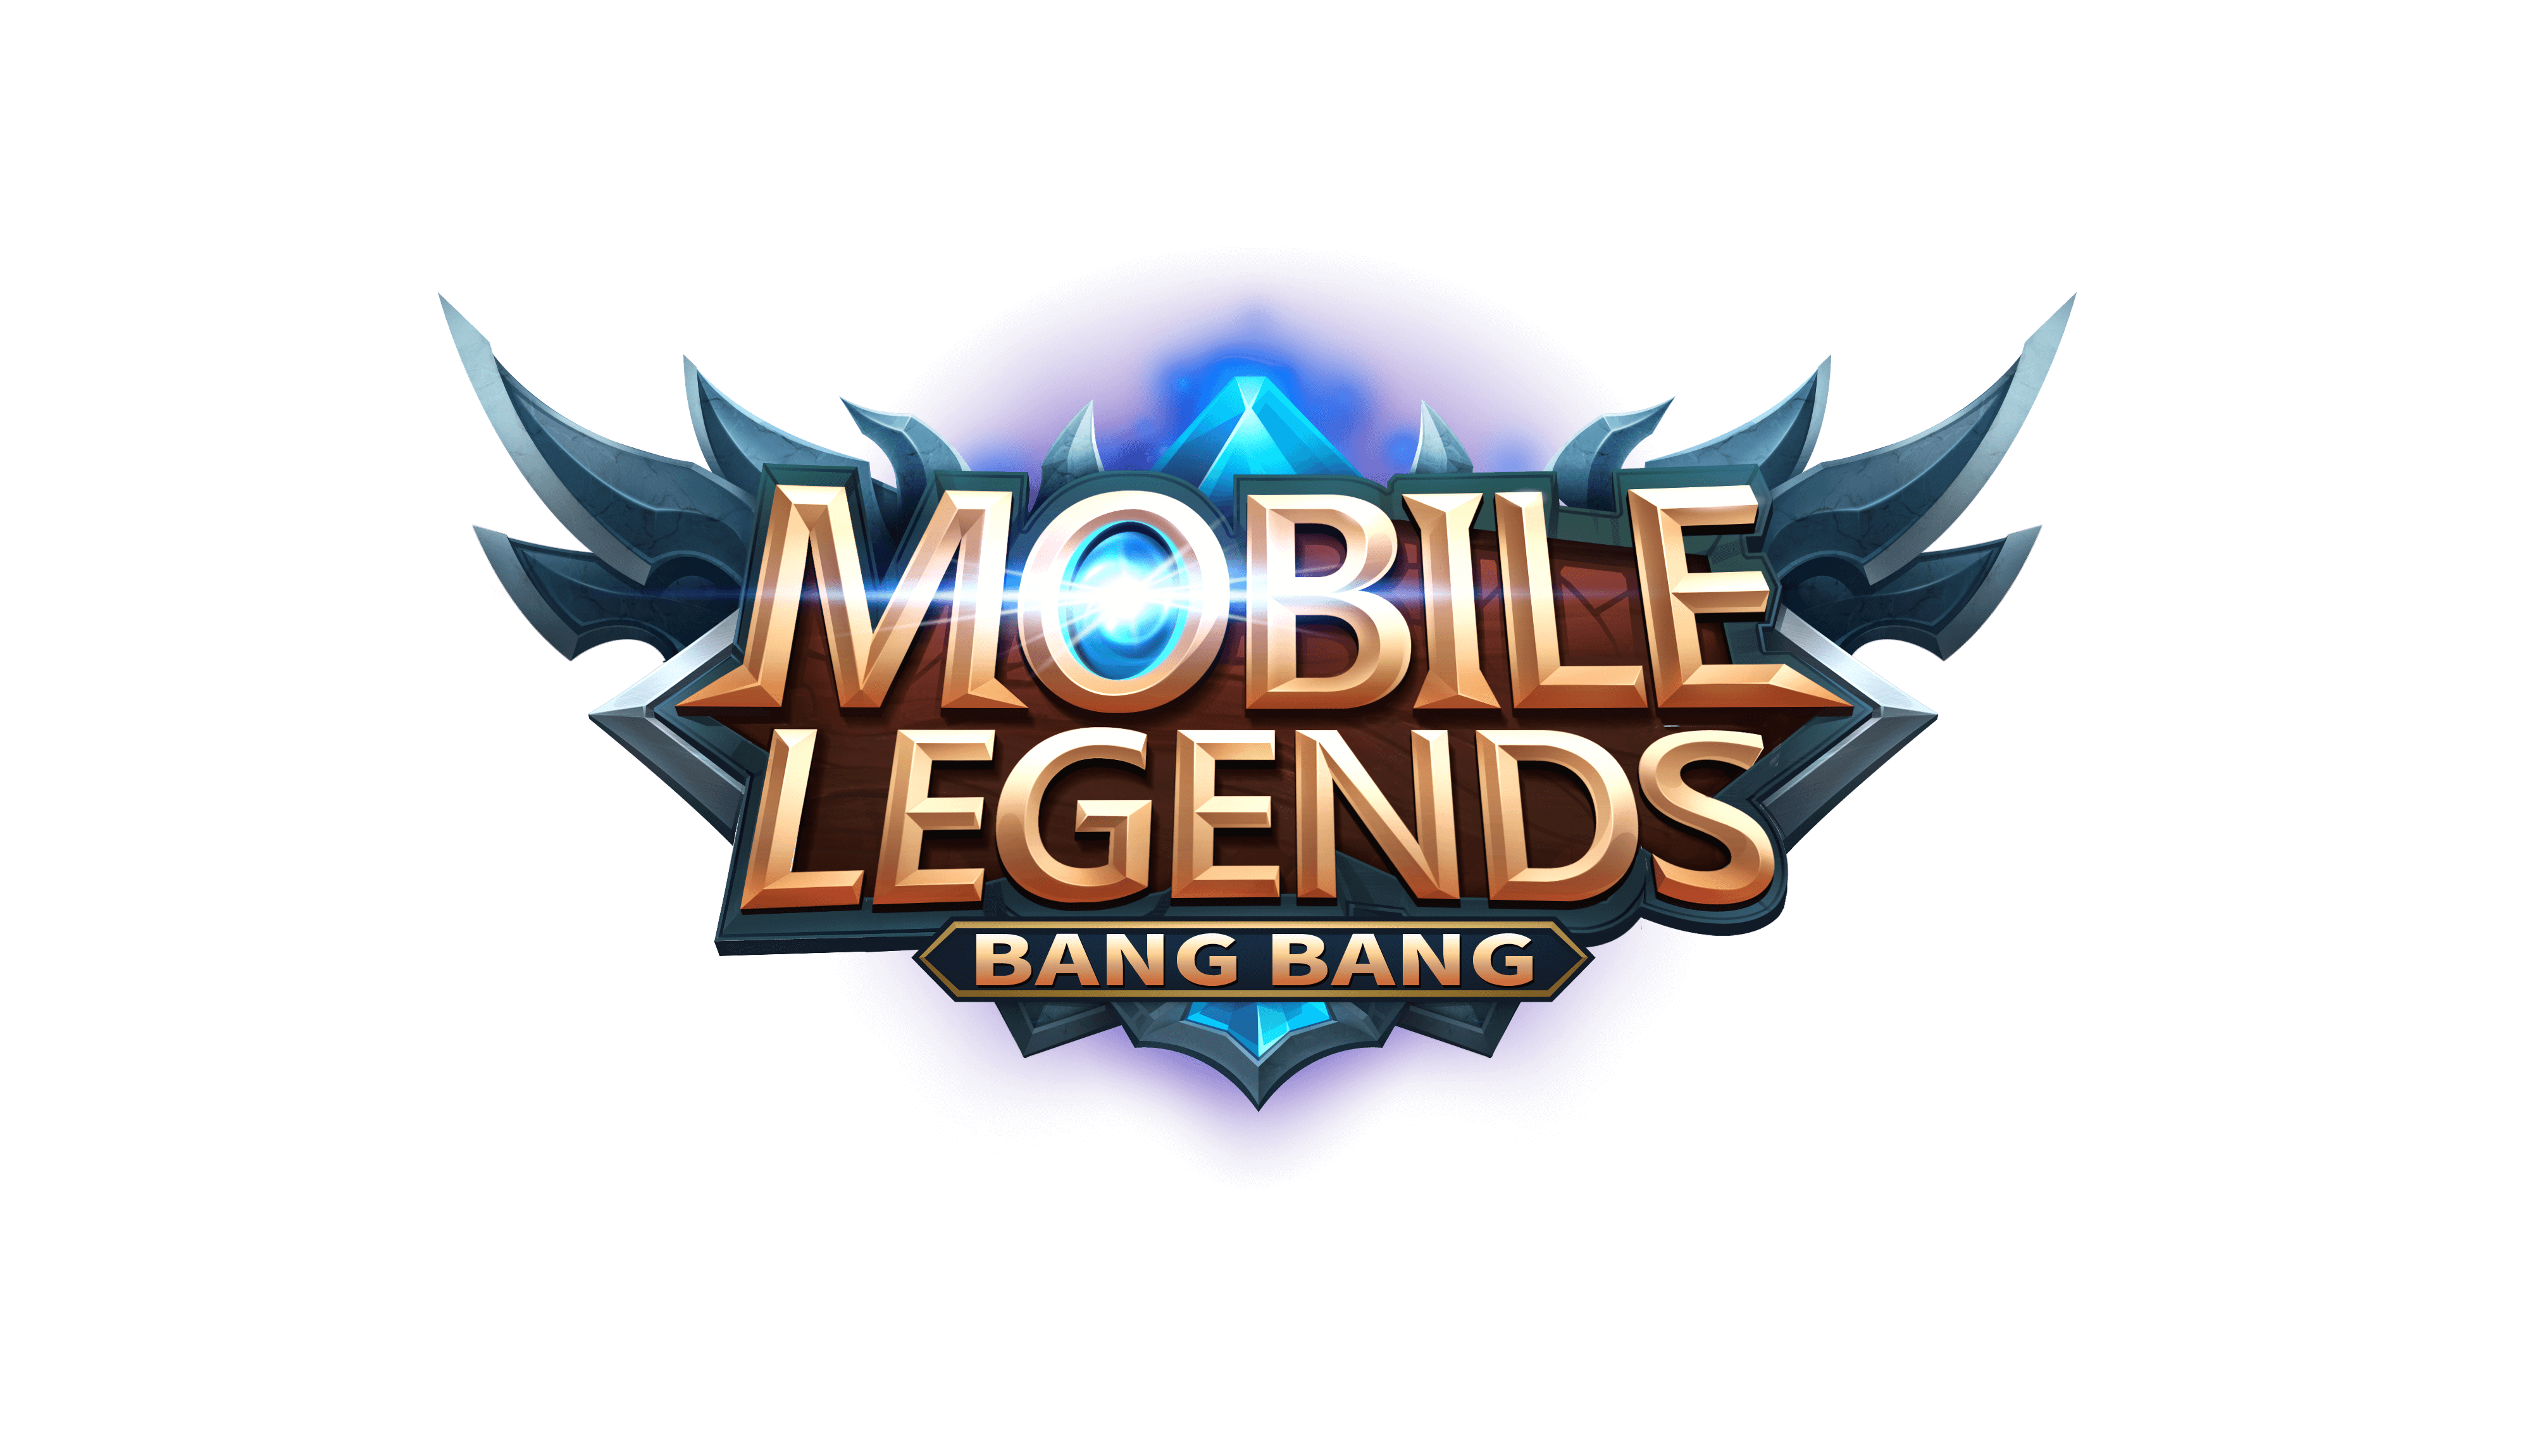 About Mobile Legends